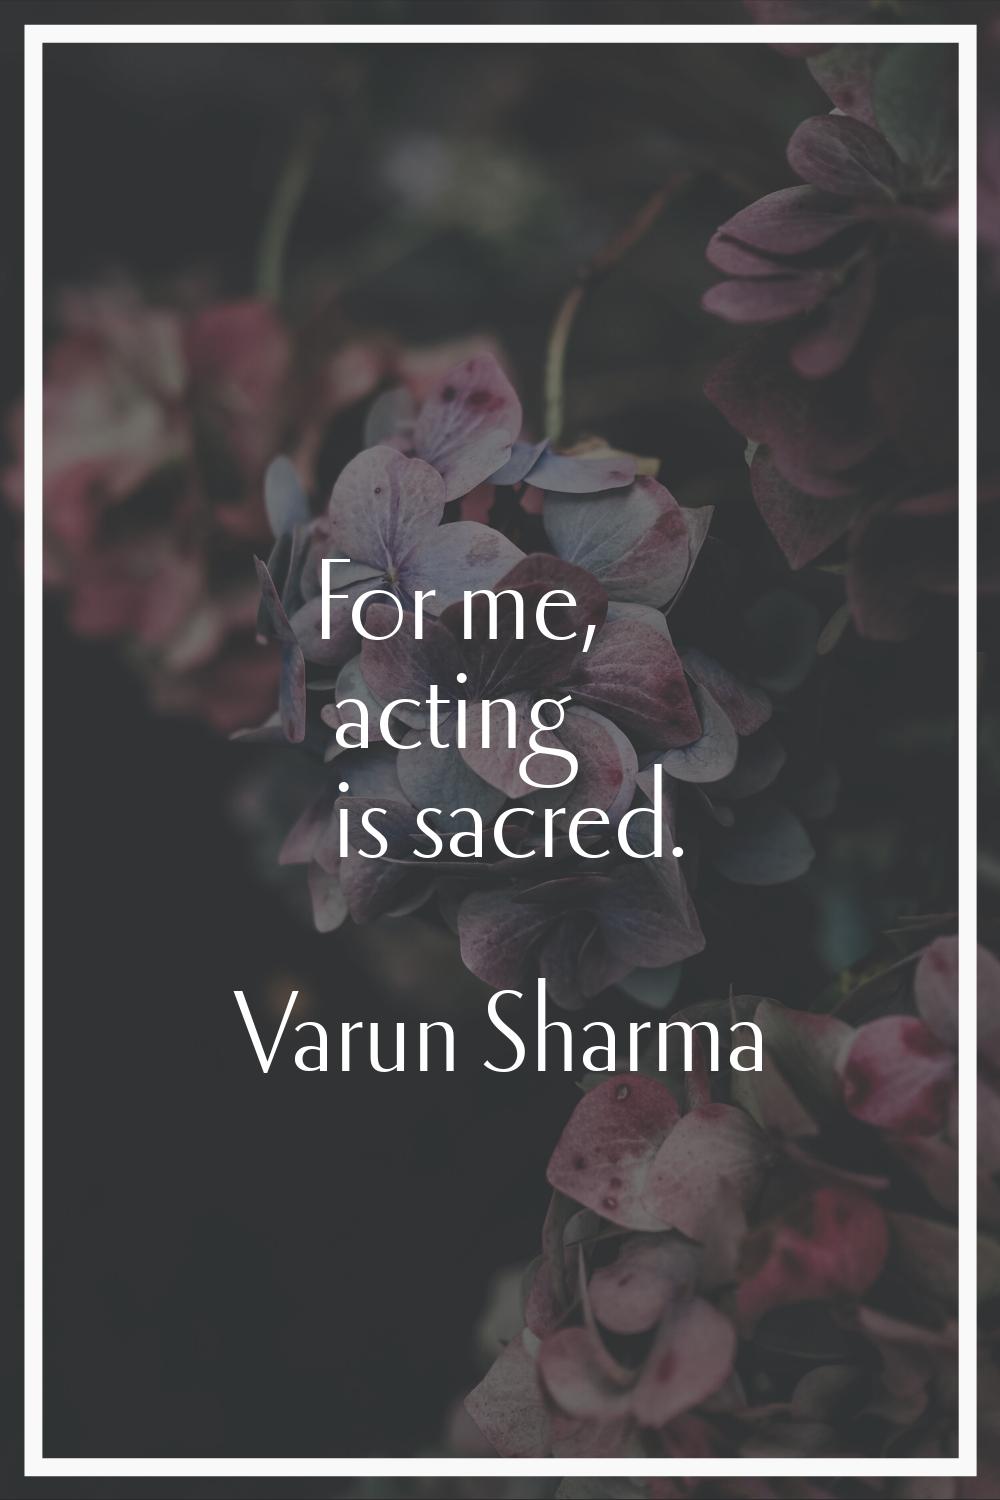 For me, acting is sacred.